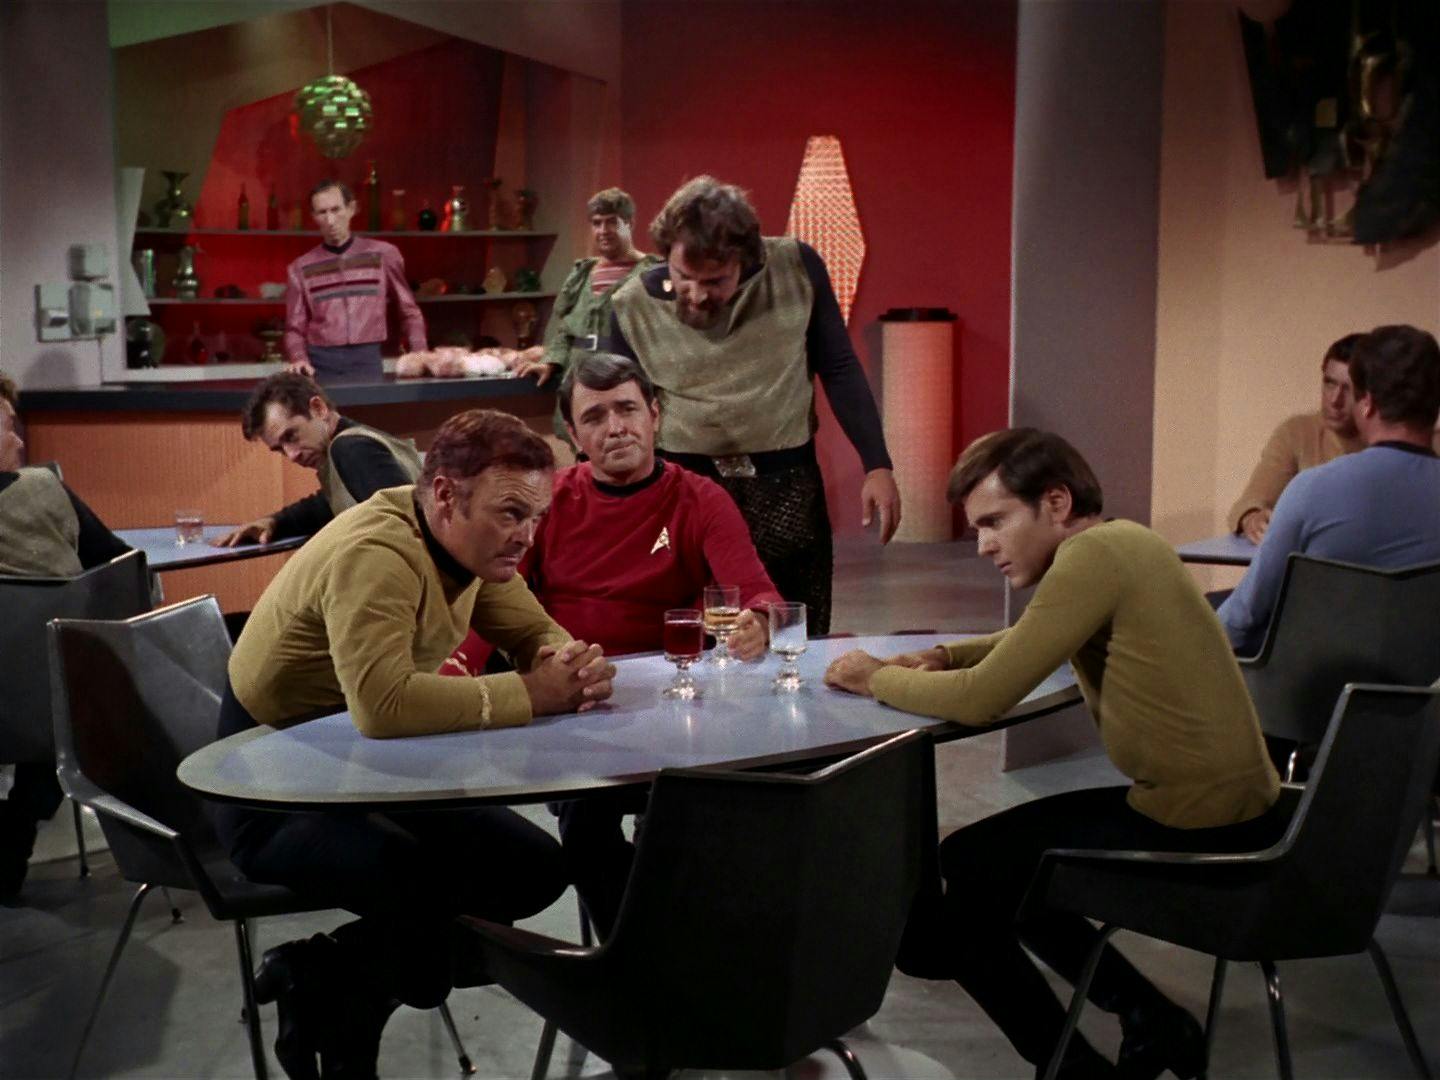 Korax taunts Scotty and Chekov with taunts in the mess in 'The Trouble with Tribbles'